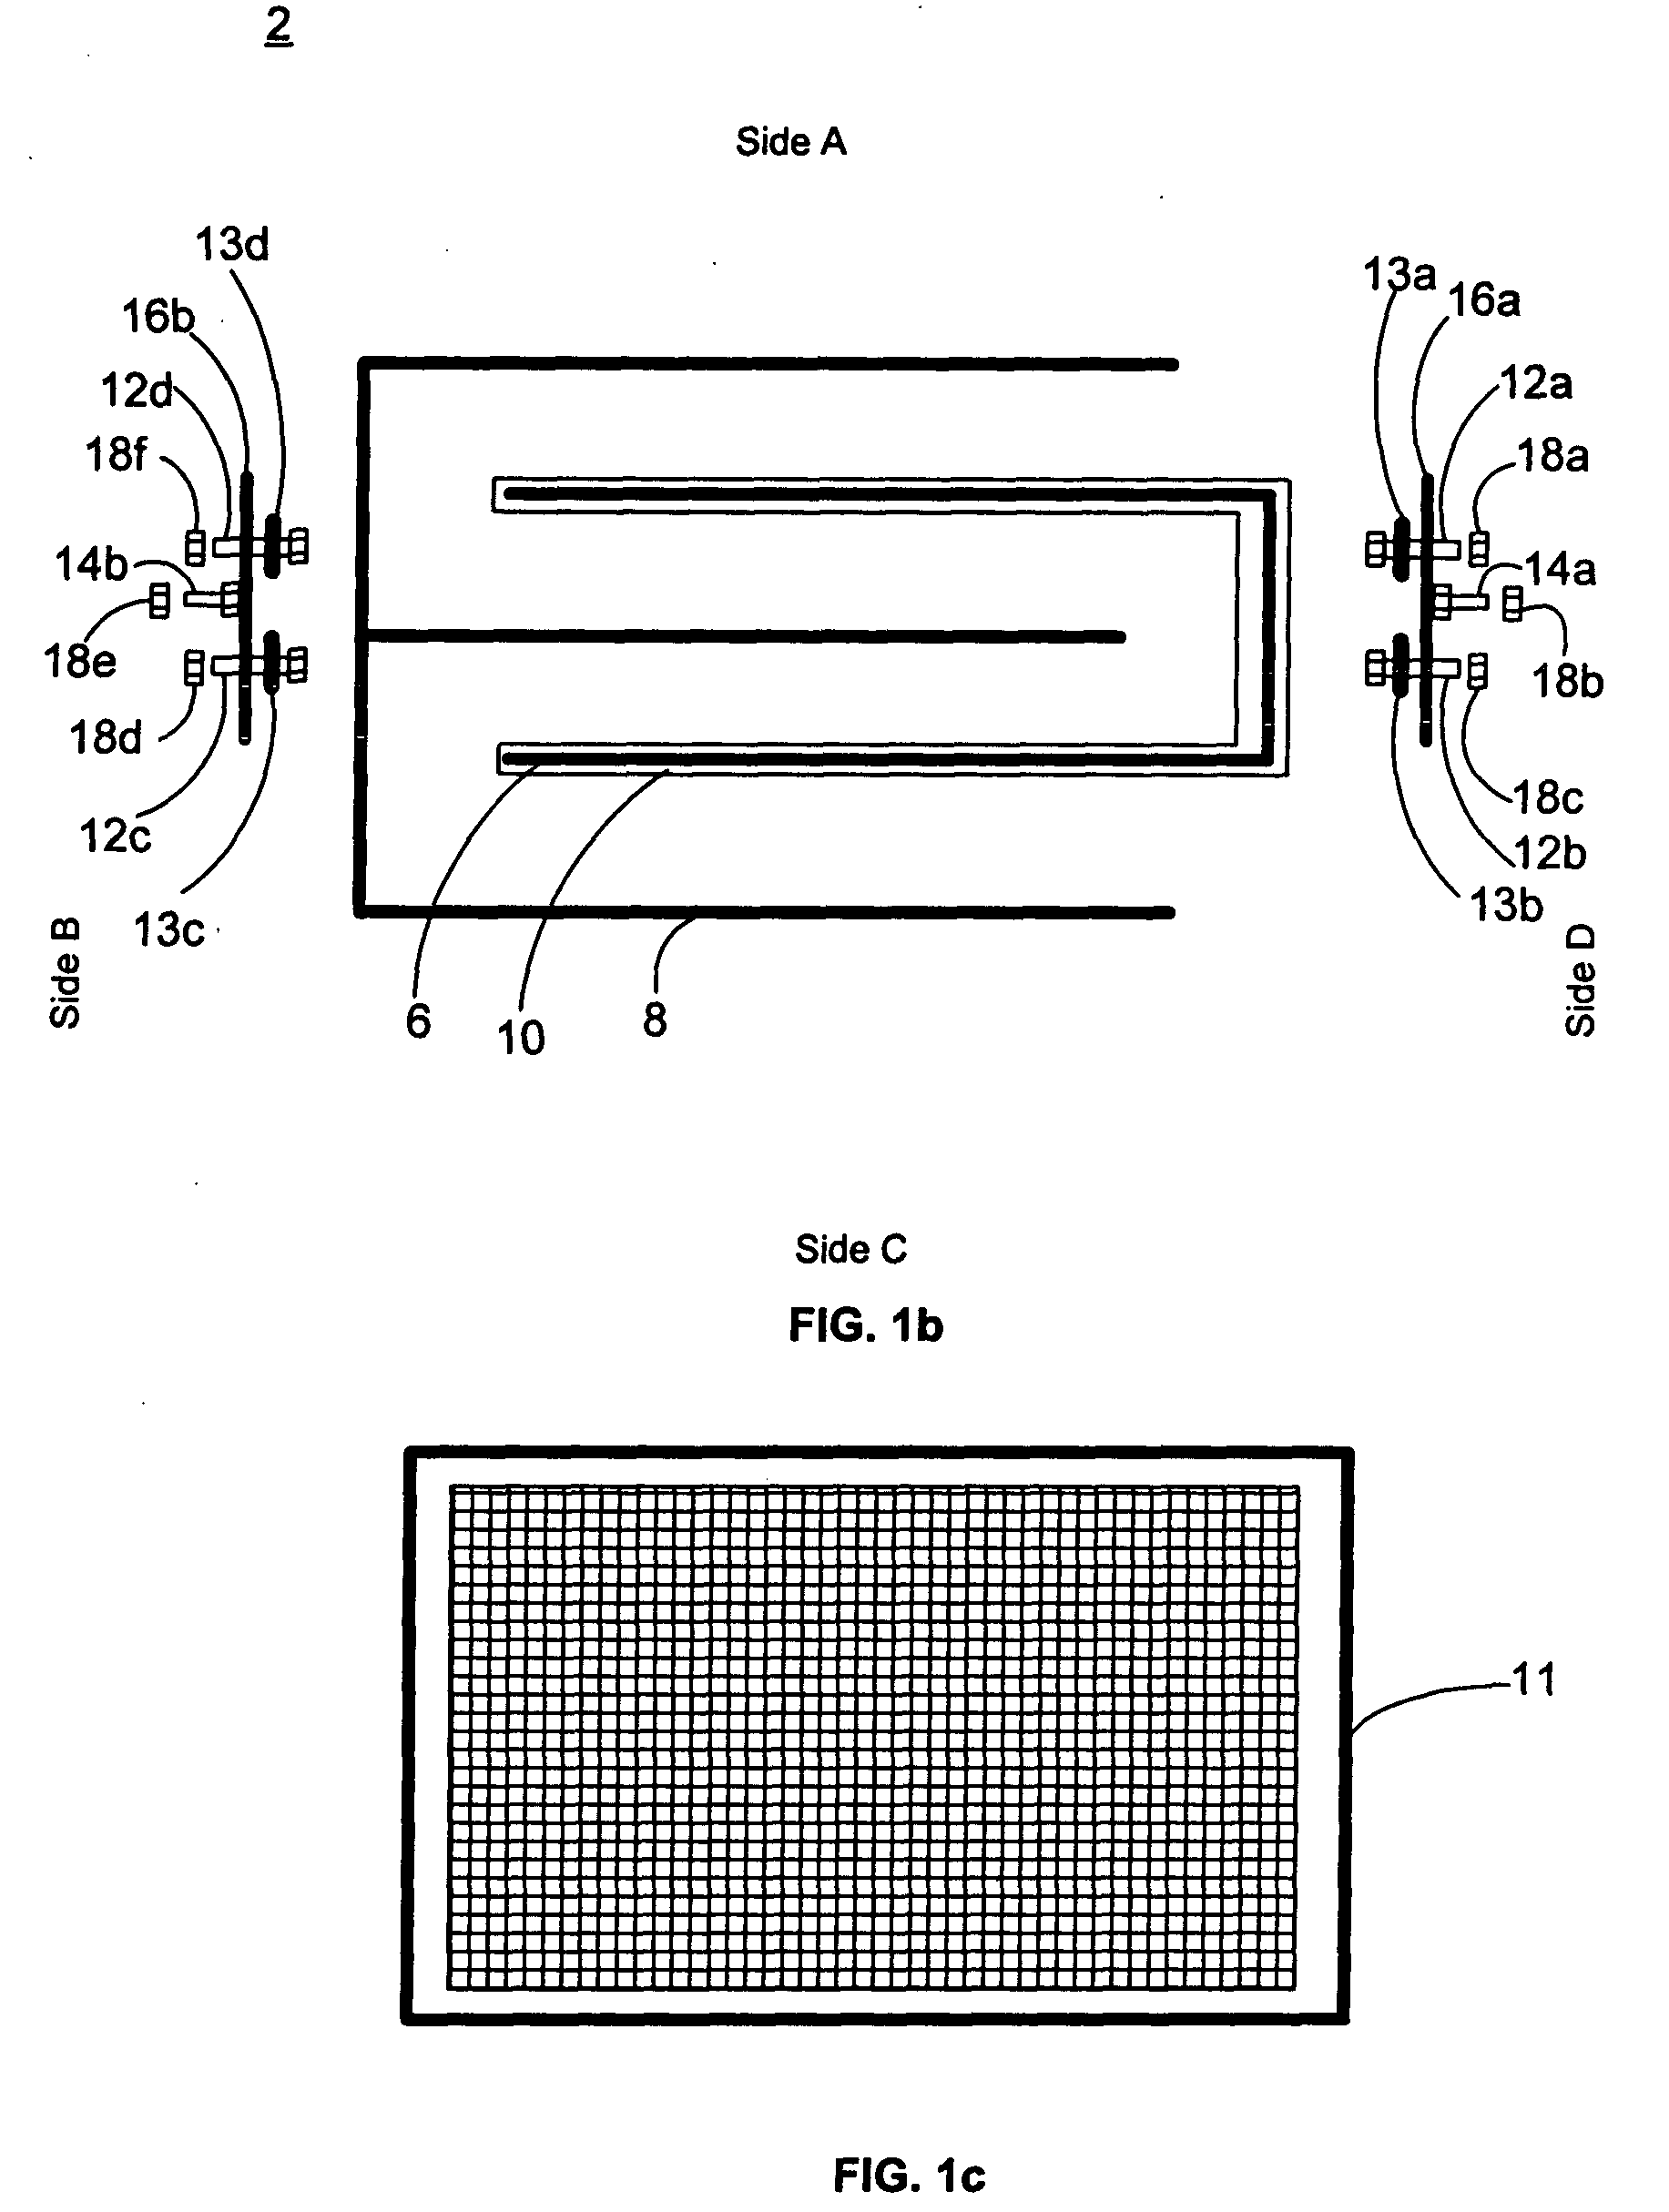 Electrolytic cell stack with porous surface active electrode for removal of organic contaminants from water and method to purify contaminated water